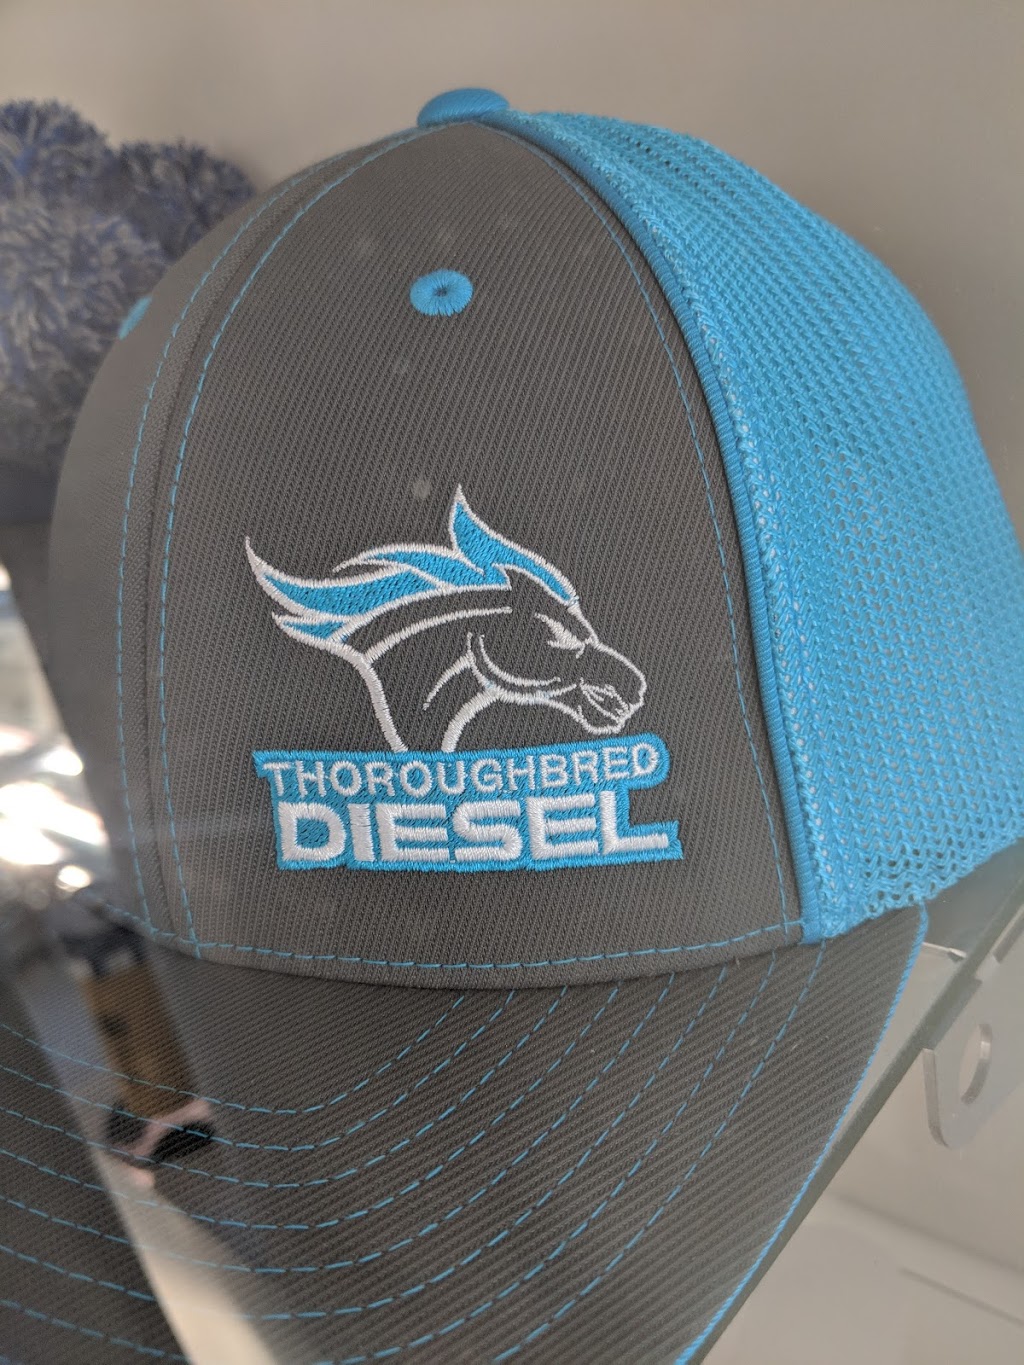 Thoroughbred Diesel | 4843 Rockwell Rd, Winchester, KY 40391 | Phone: (859) 737-4966